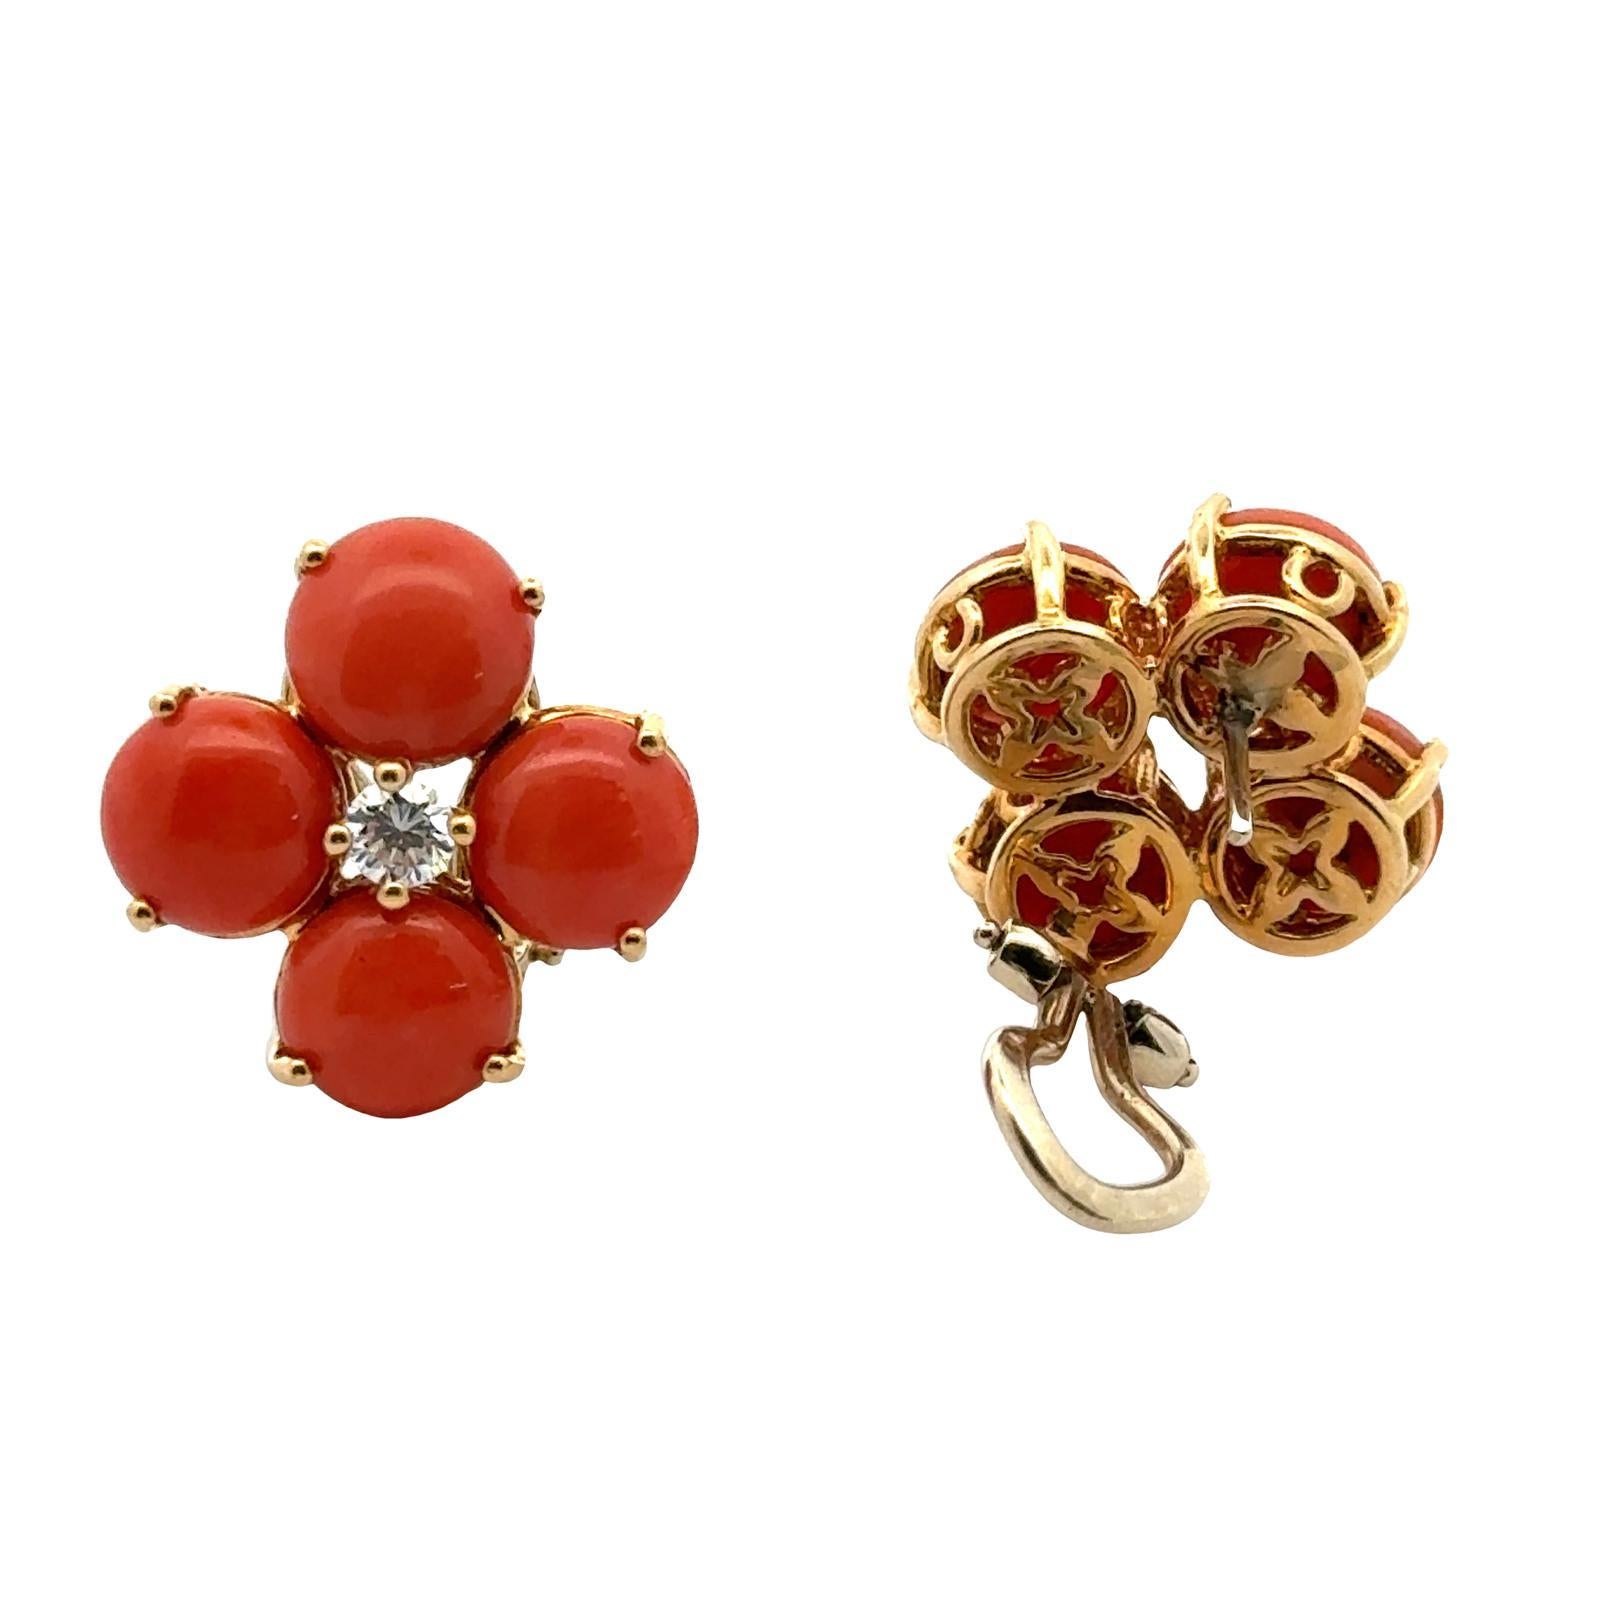 Italian Diamond Coral 18 Karat Yellow Gold Floral Lever-Back Vintage Earrings In Excellent Condition For Sale In Boca Raton, FL